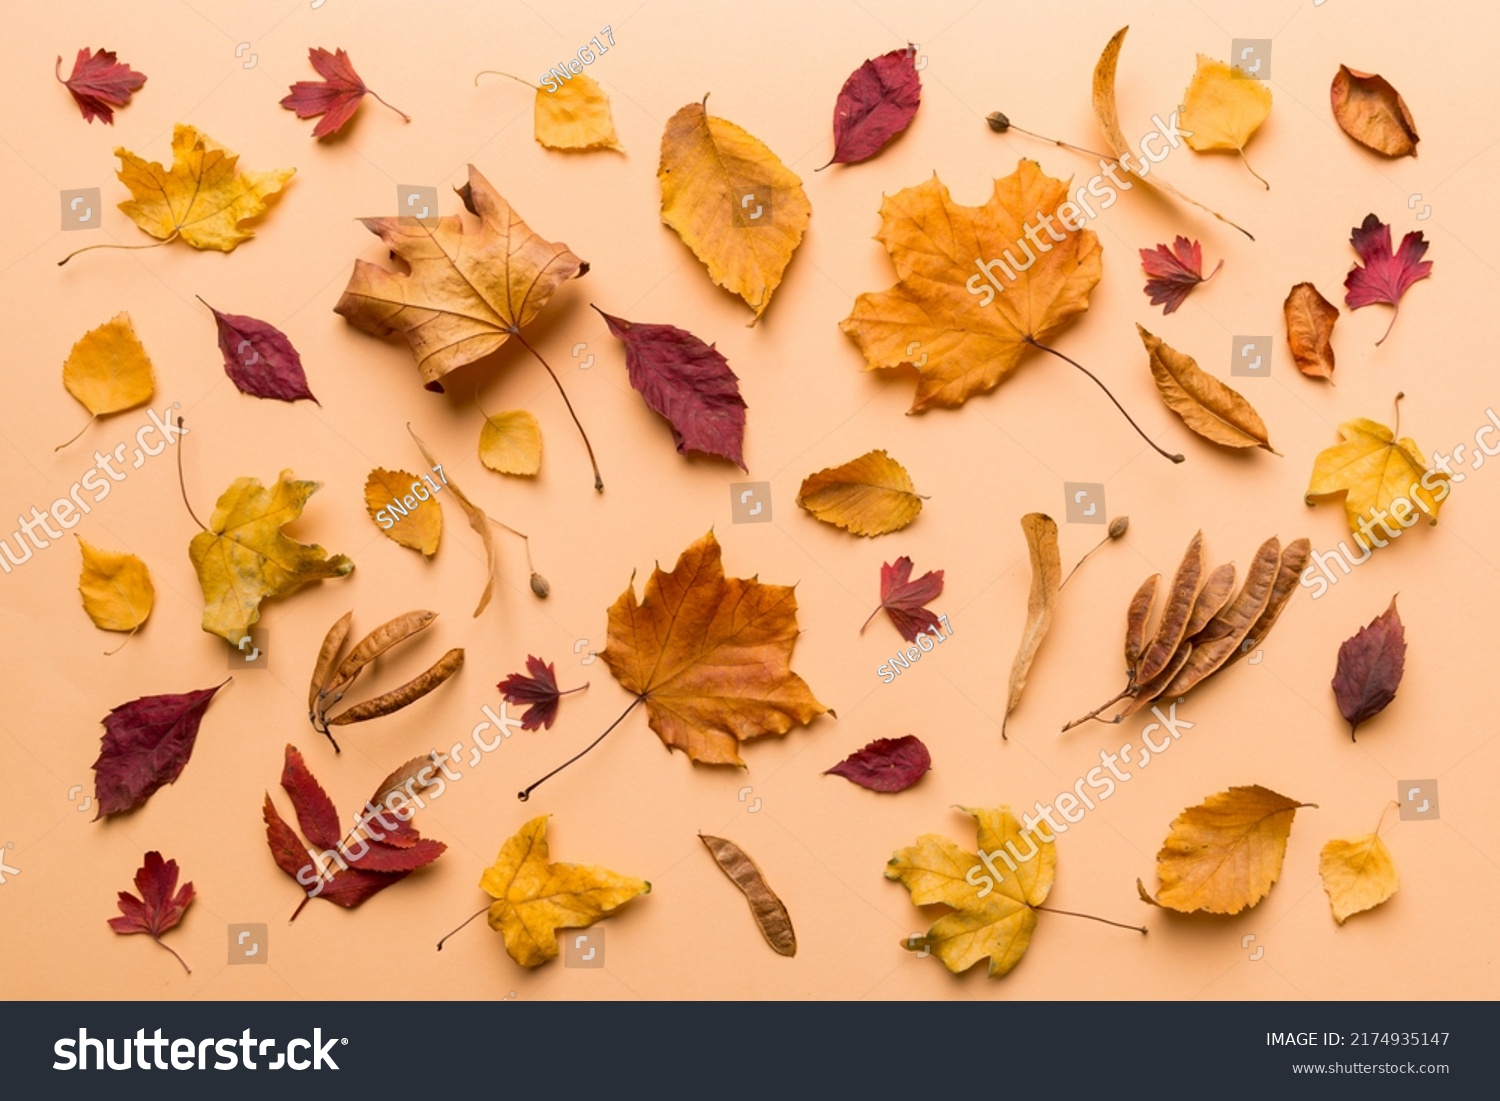 Autumn composition. Pattern made of dried leaves and other design accessories on table. Flat lay, top view. #2174935147